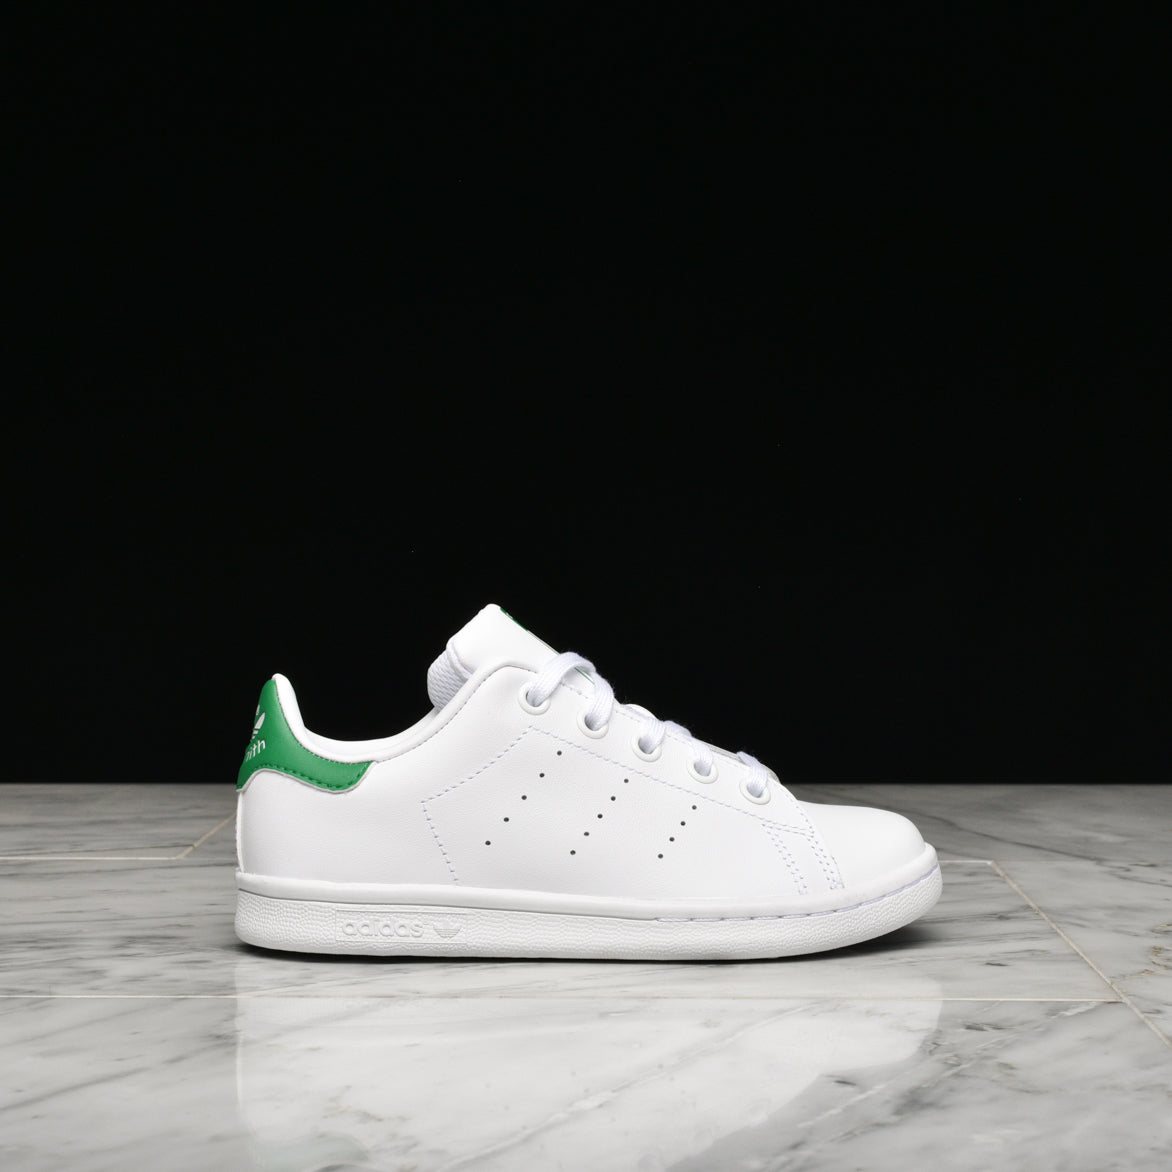 STAN SMITH (PS) - WHITE / GREEN lapstoneandhammer.com